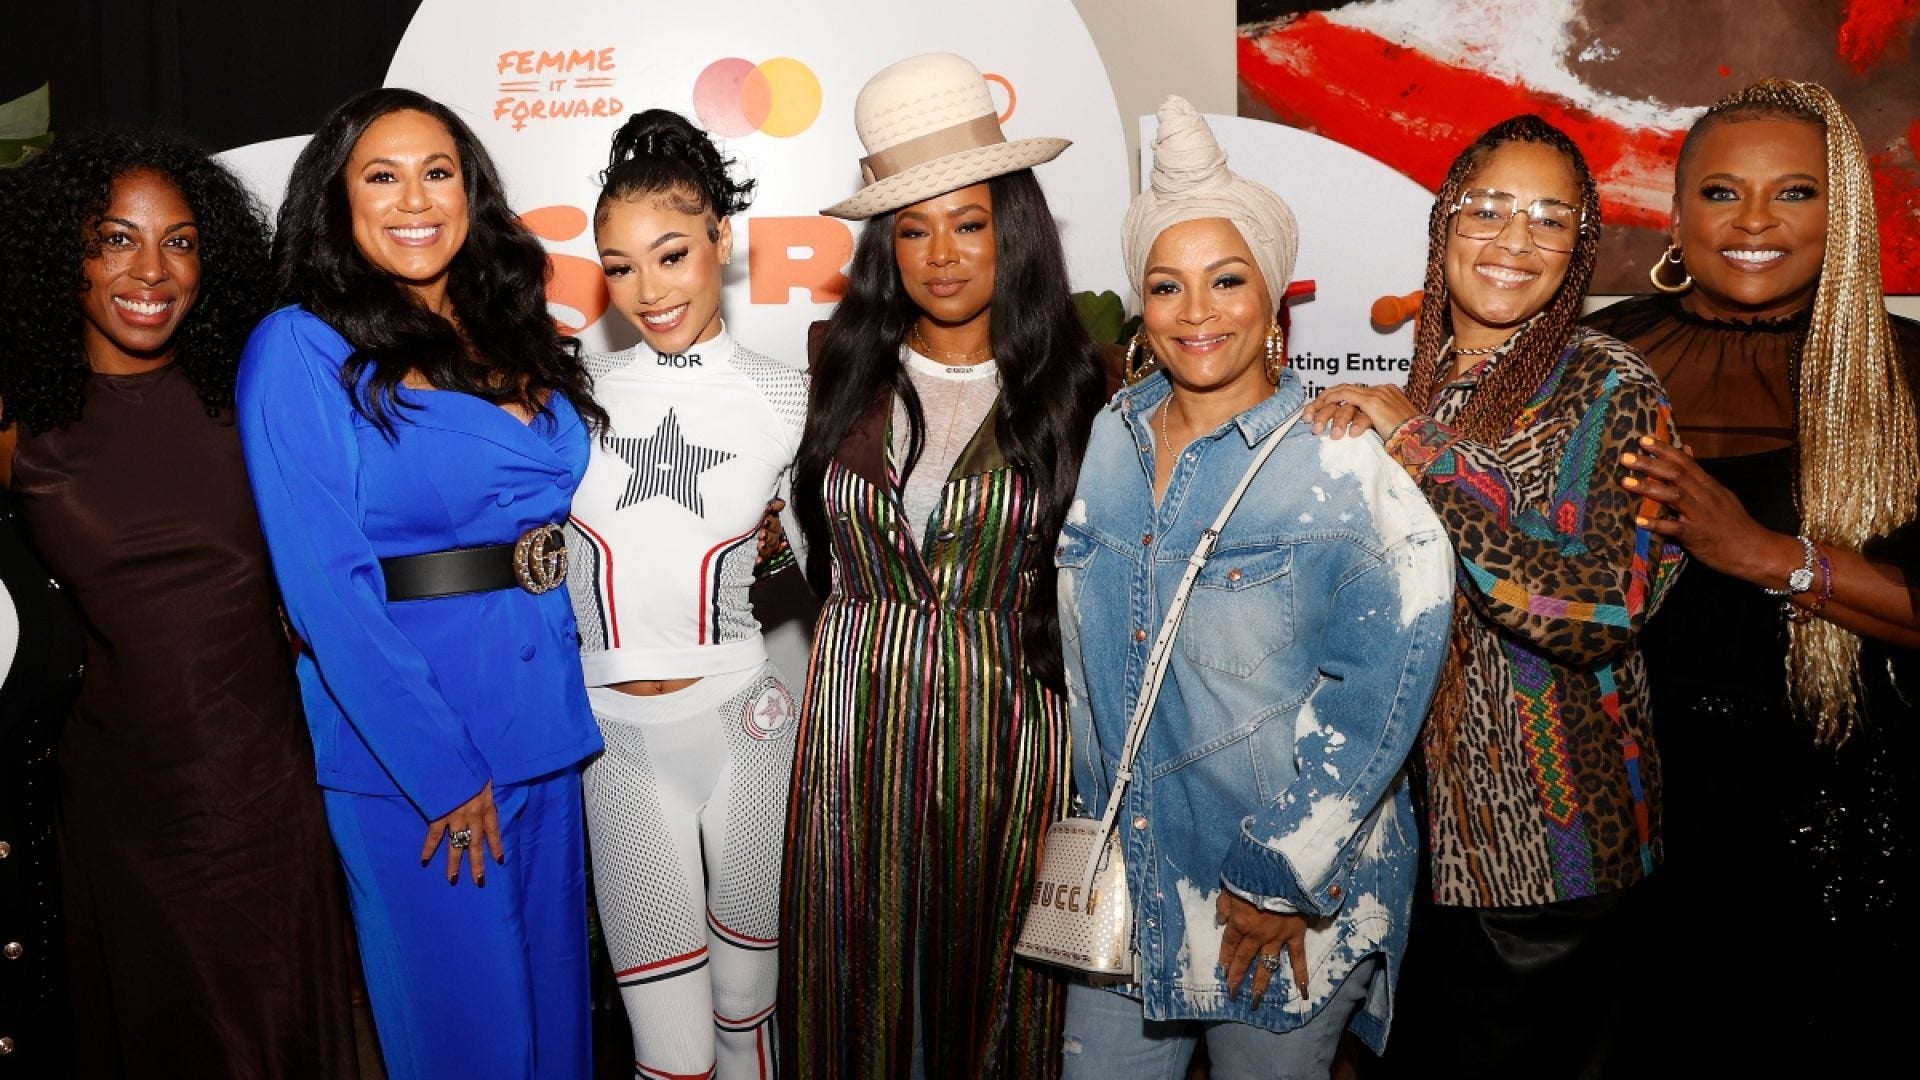 MC Lyte, Coi Leray, Lil’ Kim And More Celebrate 50th Anniversary Of Hip Hop With “She Runs This” Panel Series